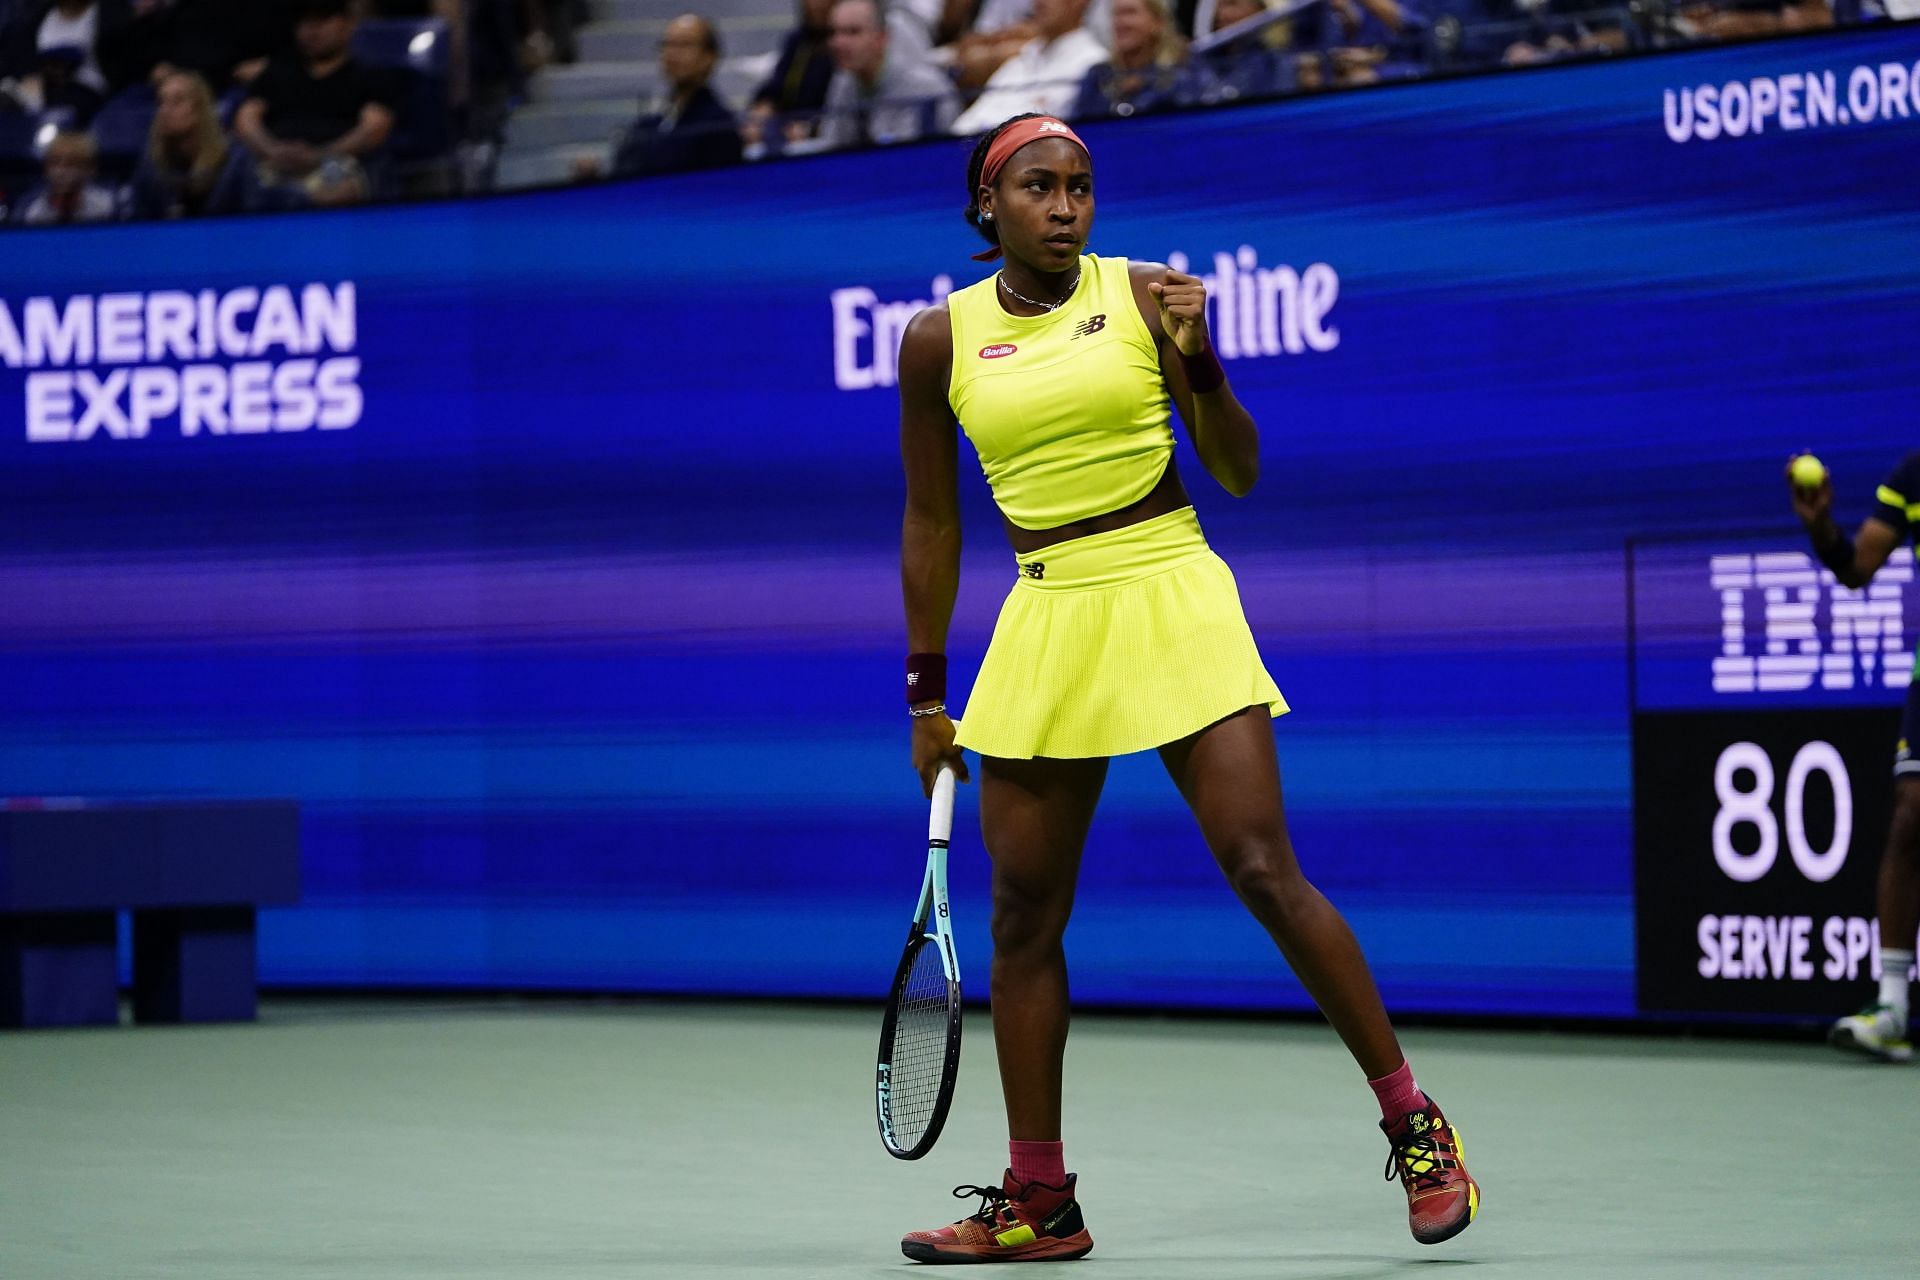 Coco Gauff against Elise Mertens in the third-round clash at US Open